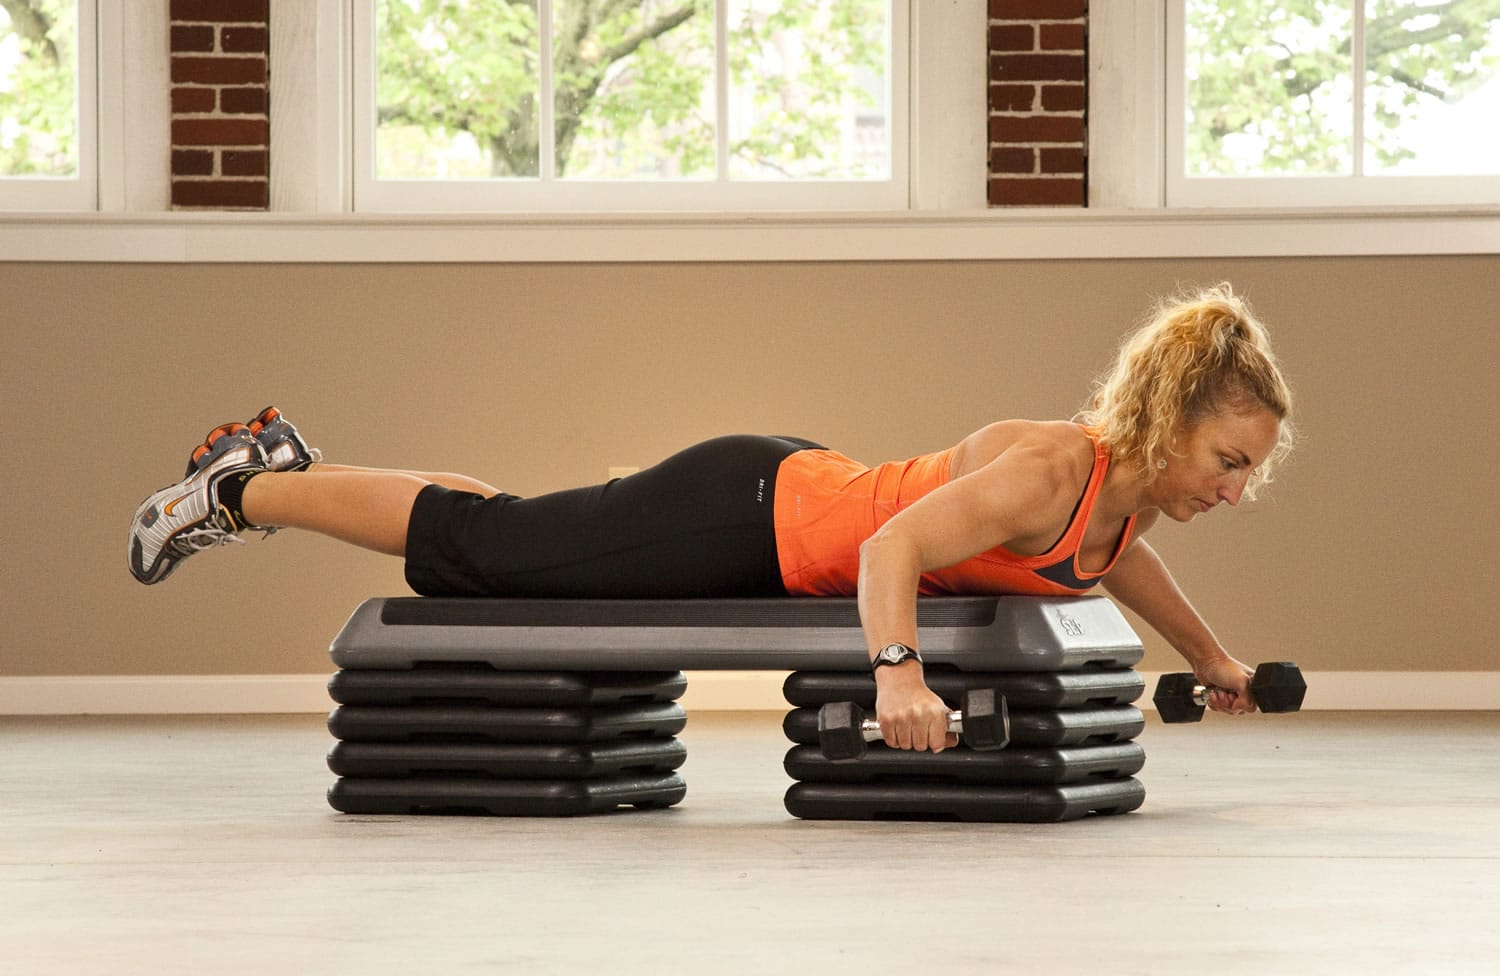 Upper Body - Reverse Flies:  Lay on your stomach over a bench, grab a light set of handweights and position both arms straight to the side beside shoulders. Use your back muscles to slightly extend your spine so you are not collapsed and flexed over the bench.